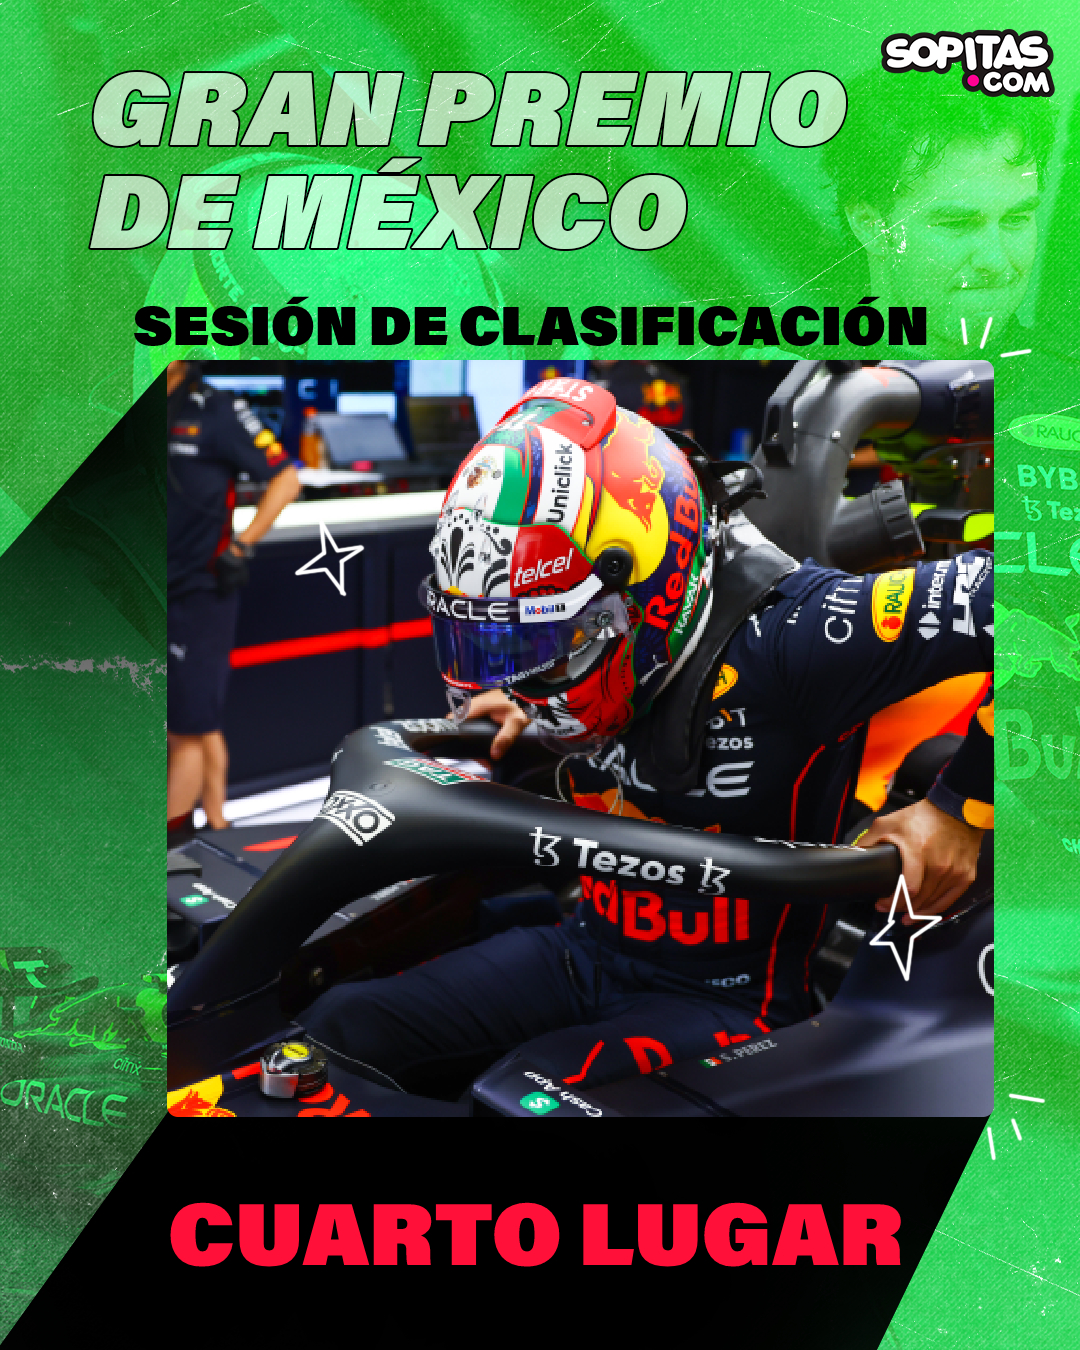 Mexican Grand Prix qualifying session